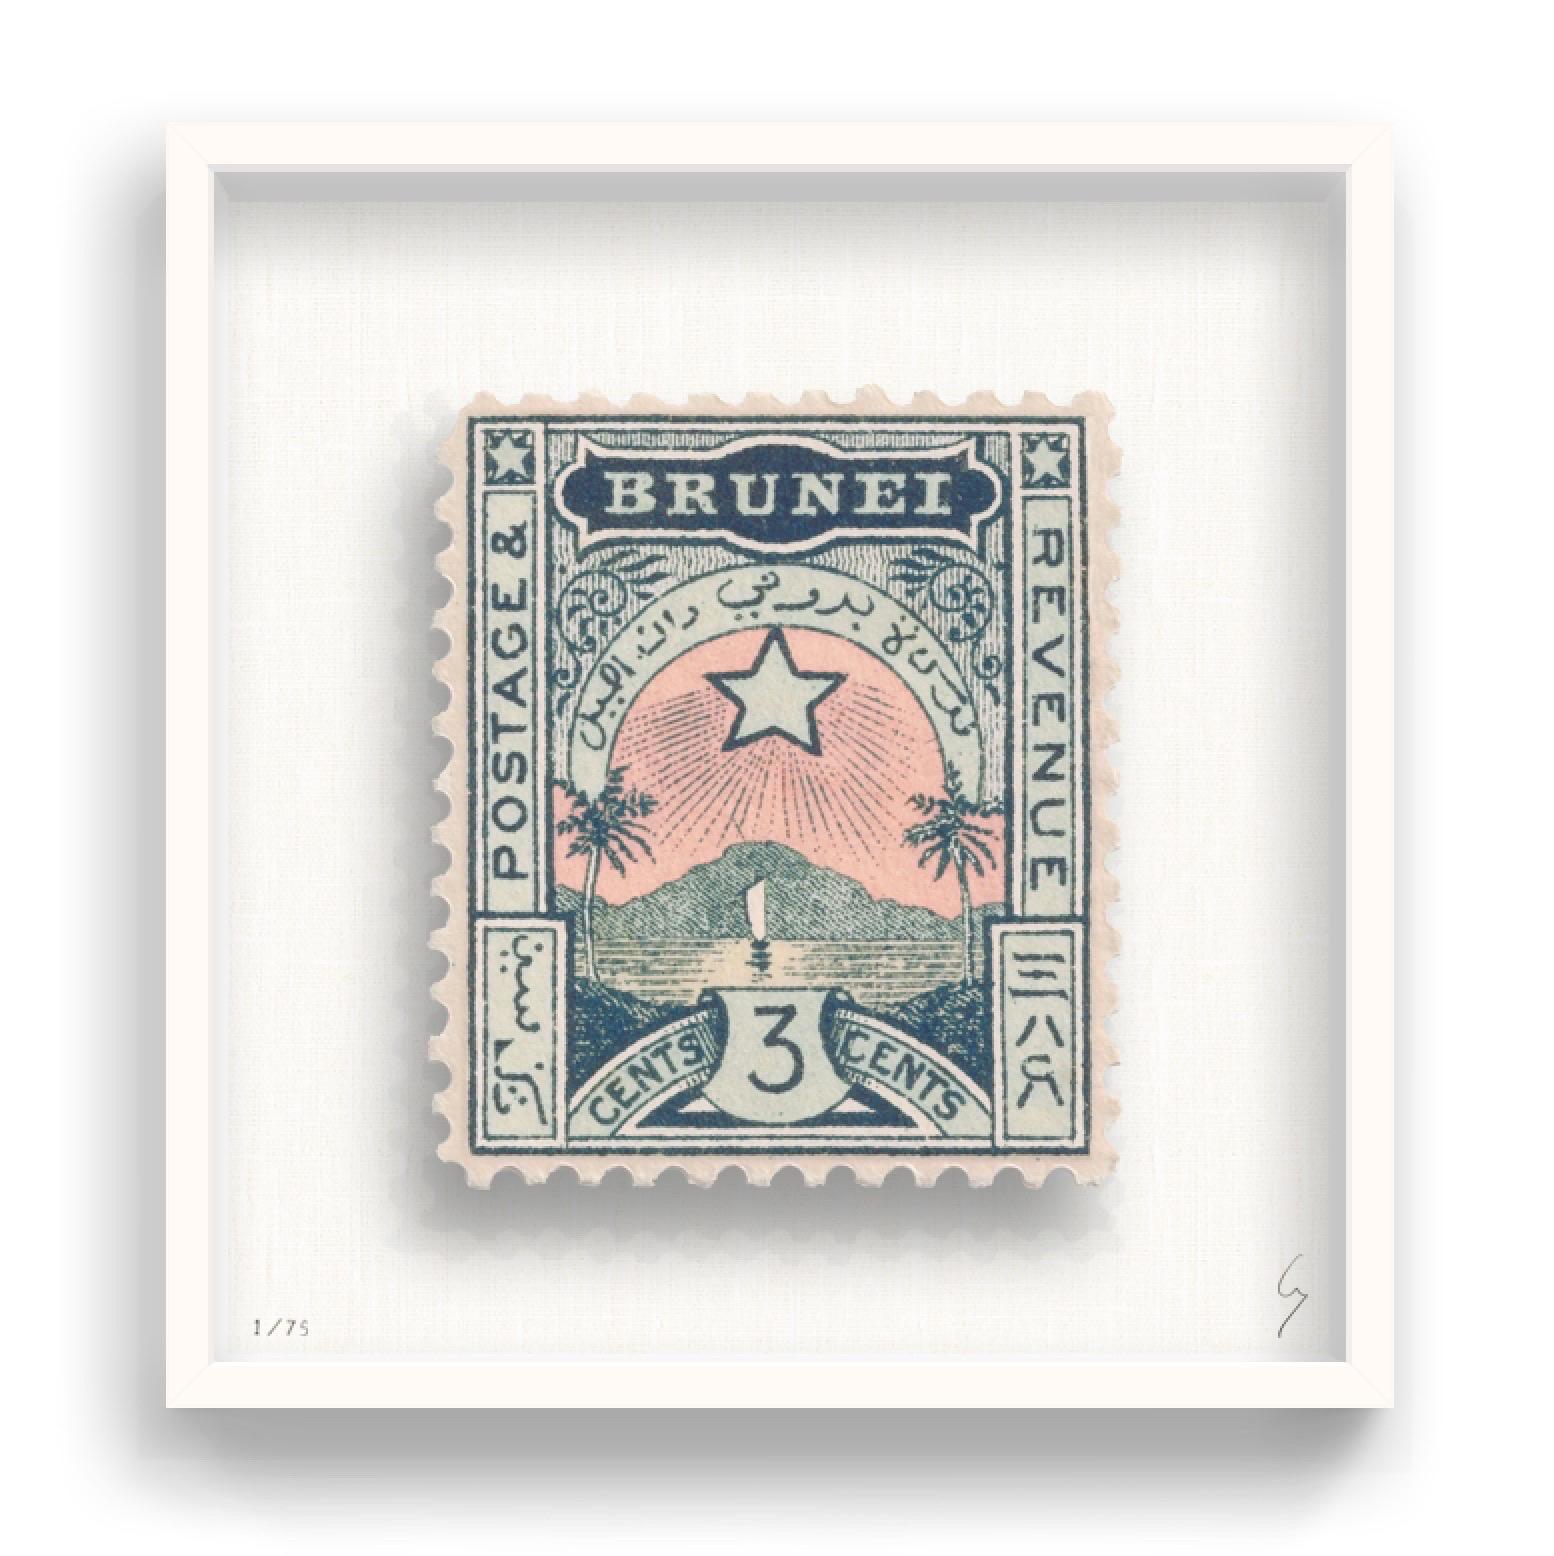 Guy Gee, Brunei (medium)

Hand-engraved print on 350gsm on G.F Smith card
53 x 56cm (20 4/5 x 22 2/5 in)
Frame included 
Edition of 75 

Each artwork by Guy had been digitally reimagined from an original postage stamp. Cut out and finished by hand,